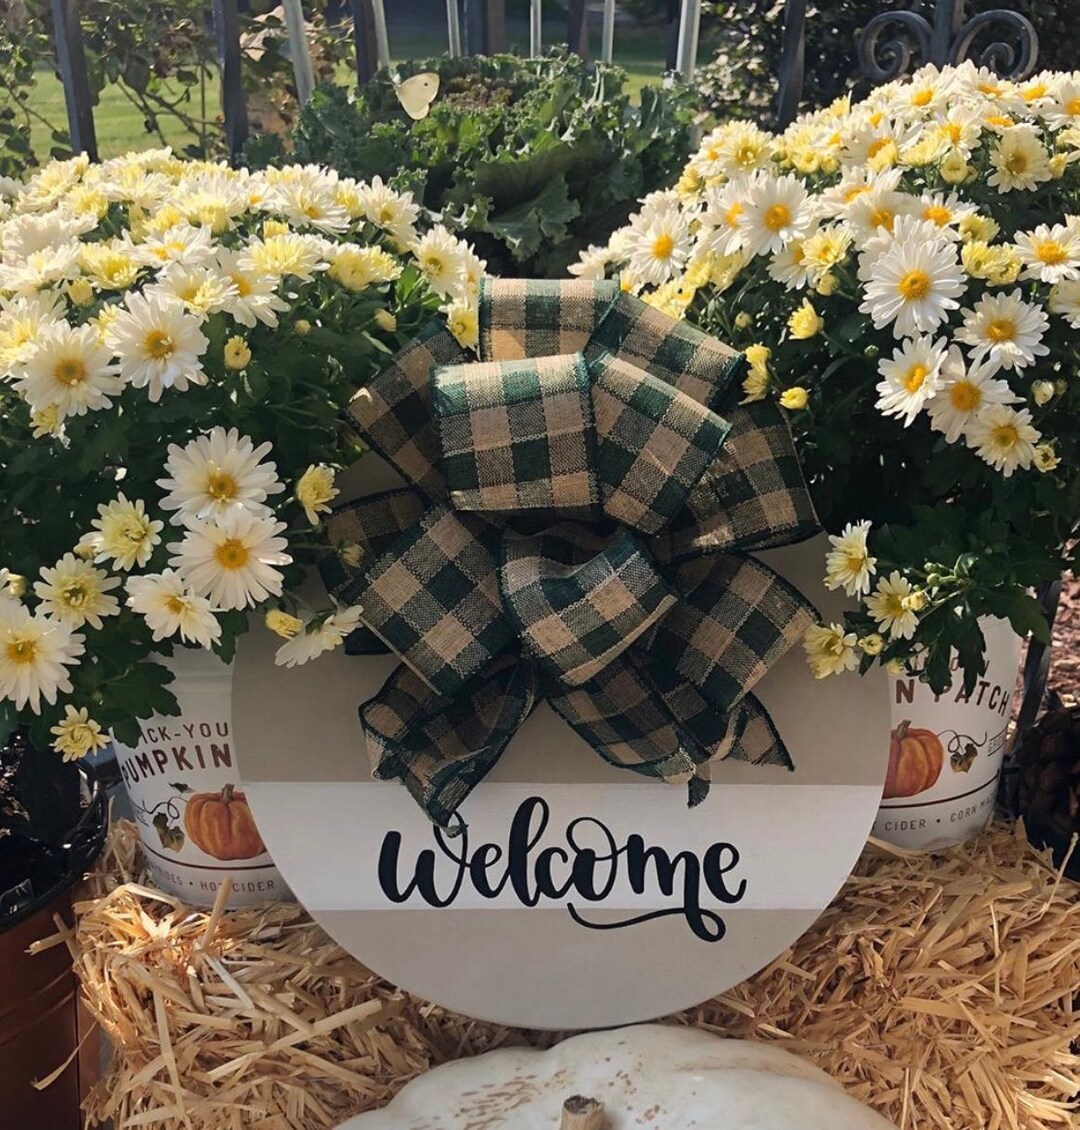 12 Inch Wooden Round Welcome Sign W/ Green Checked Bow colors Optional 